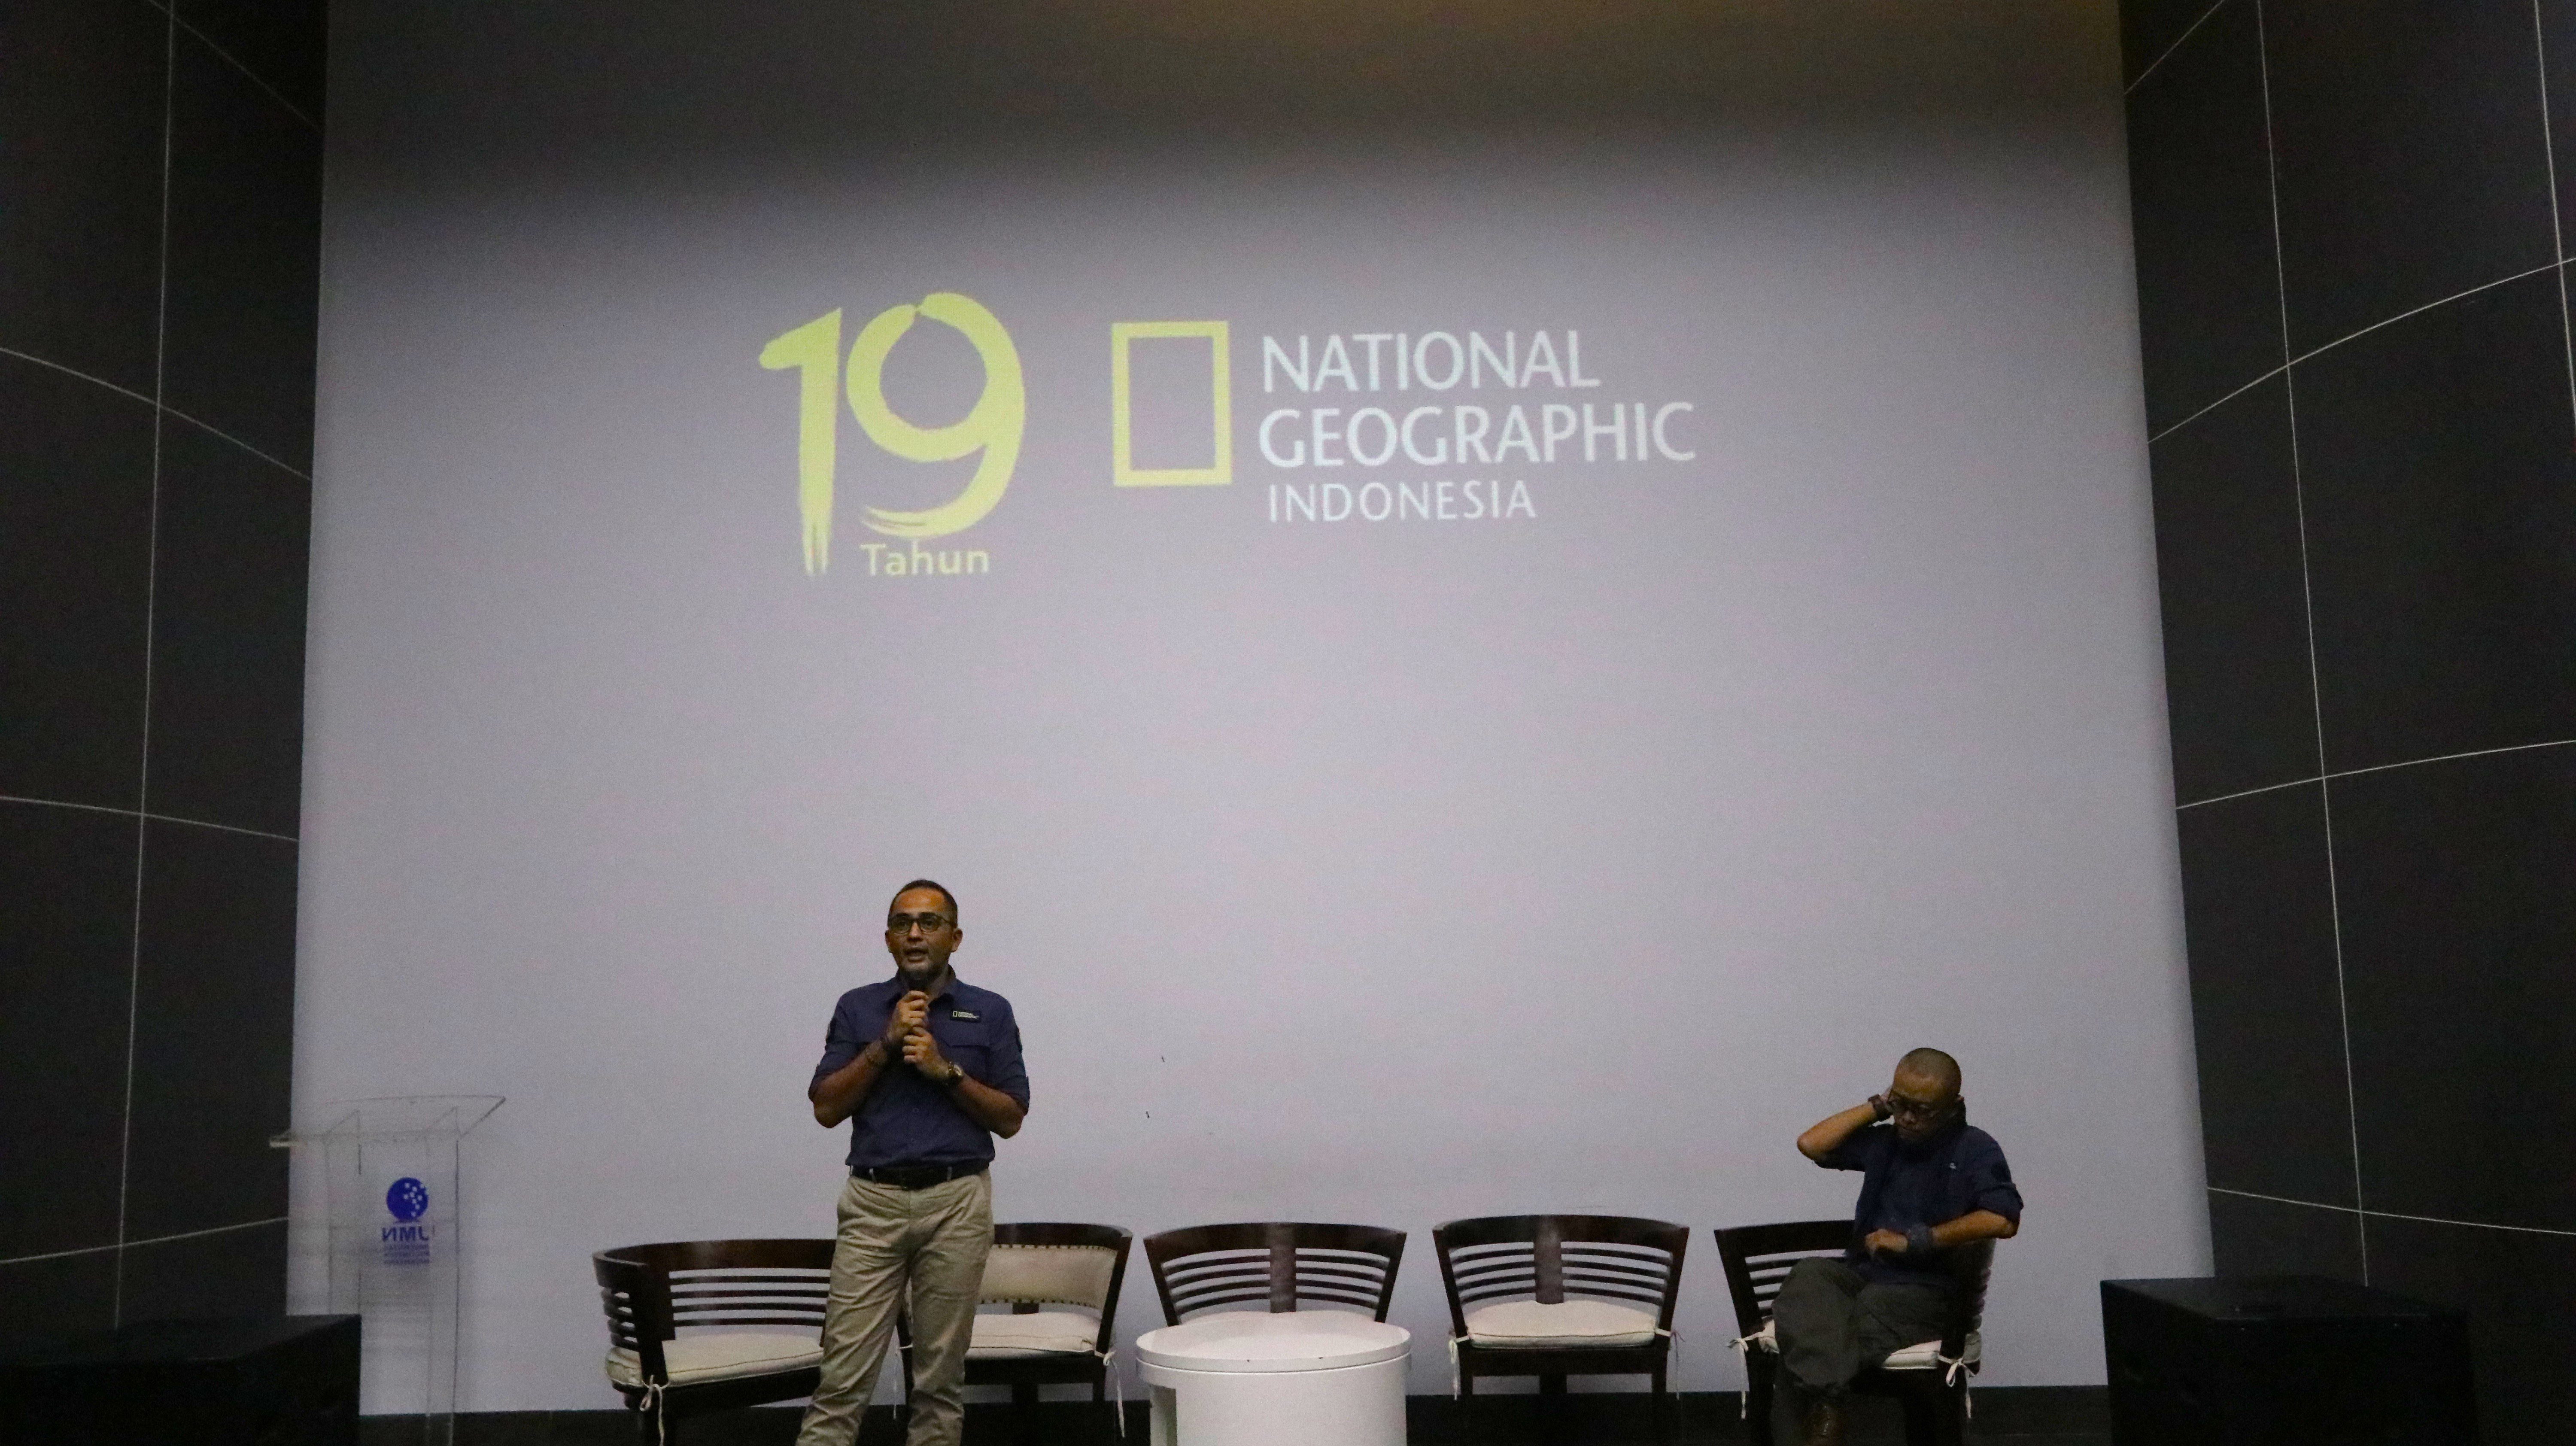 Sharing Journalistic Experience in National Geographic Indonesia's 19th Anniversary Celebration